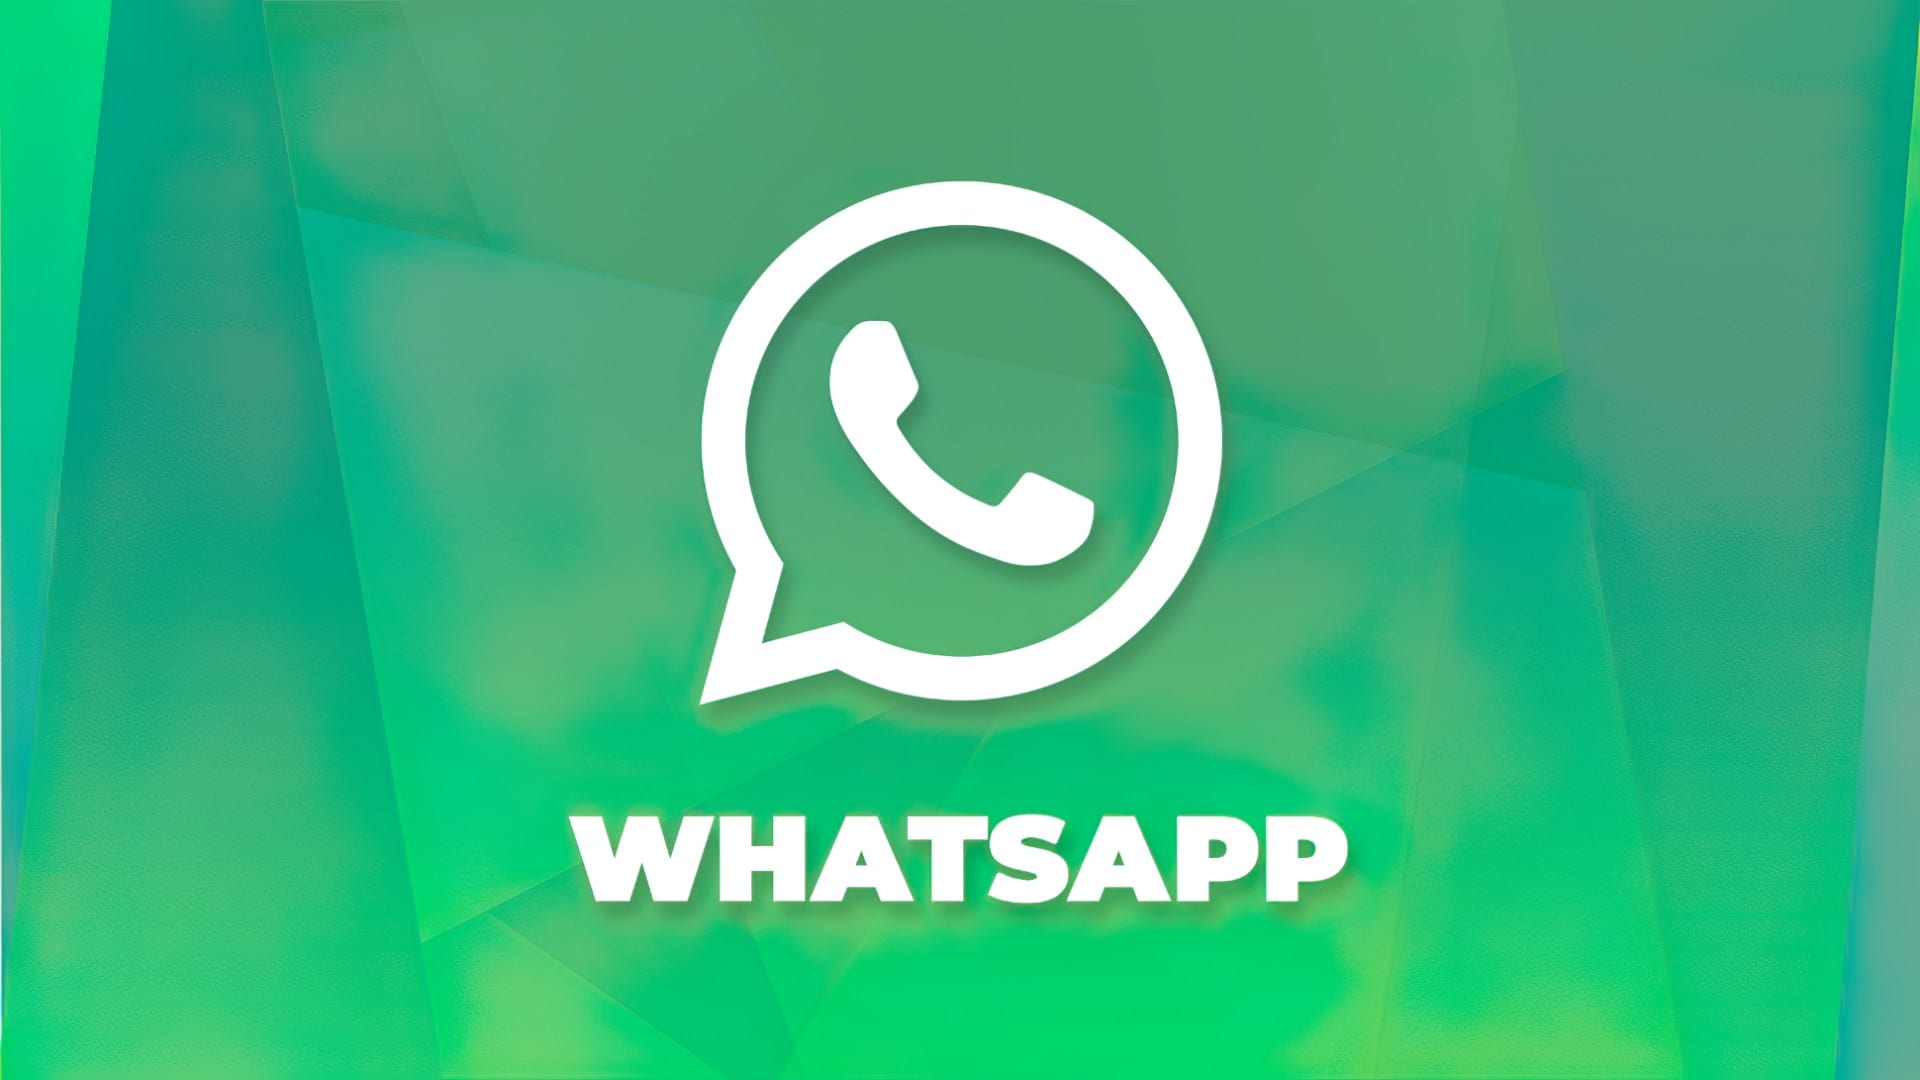 WhatsApp Transfer of the chat history between Android and iOS